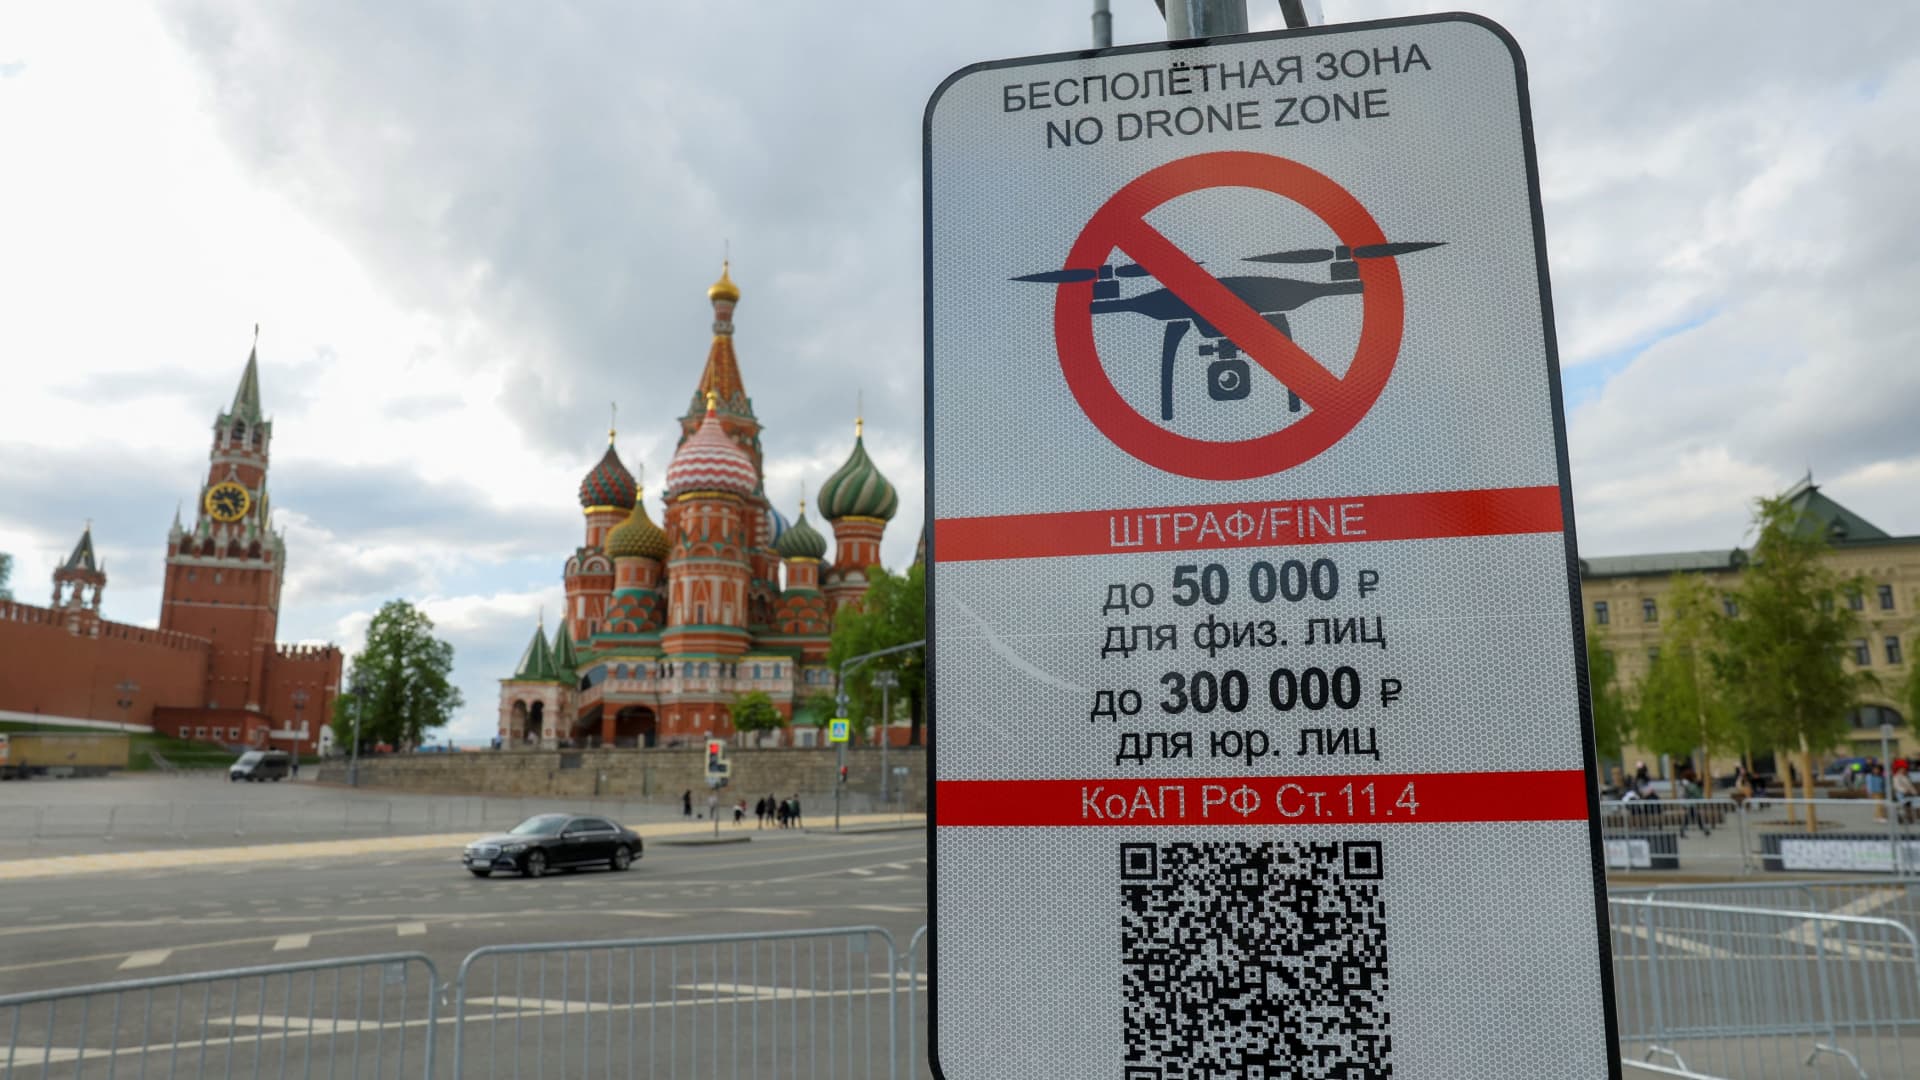 A sign prohibiting unmanned aerial vehicles flying over the area is on display near the State Historical Museum and the Kremlin wall in central Moscow, Russia, May 3, 2023. 